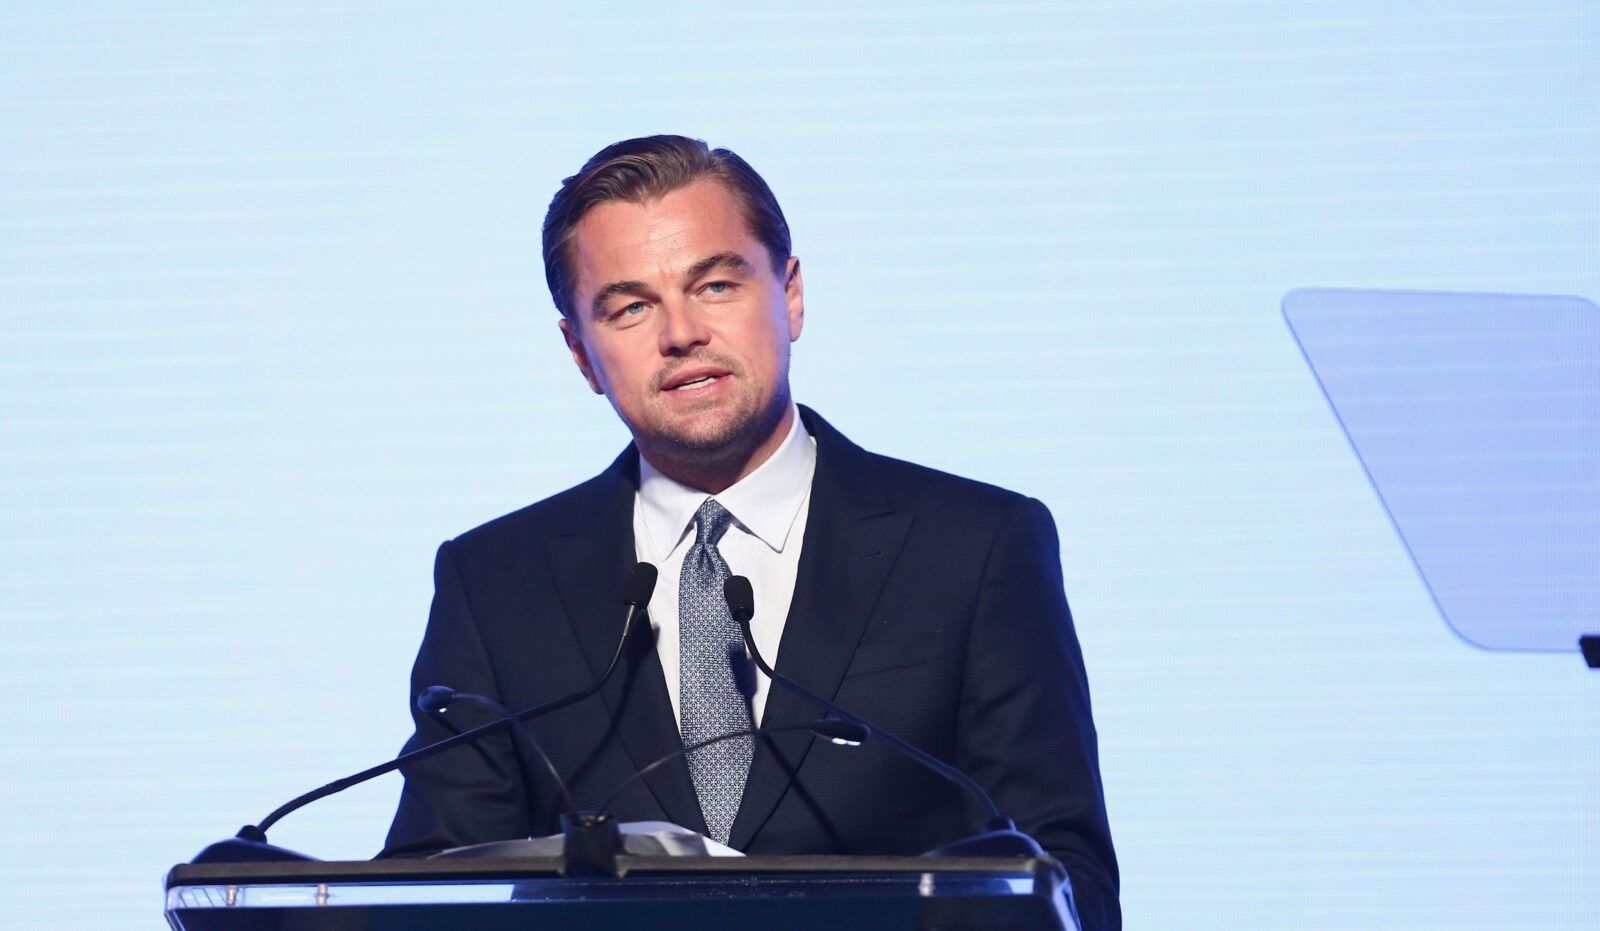 Leonardo DiCaprio in blue suit giving a speech on climate change